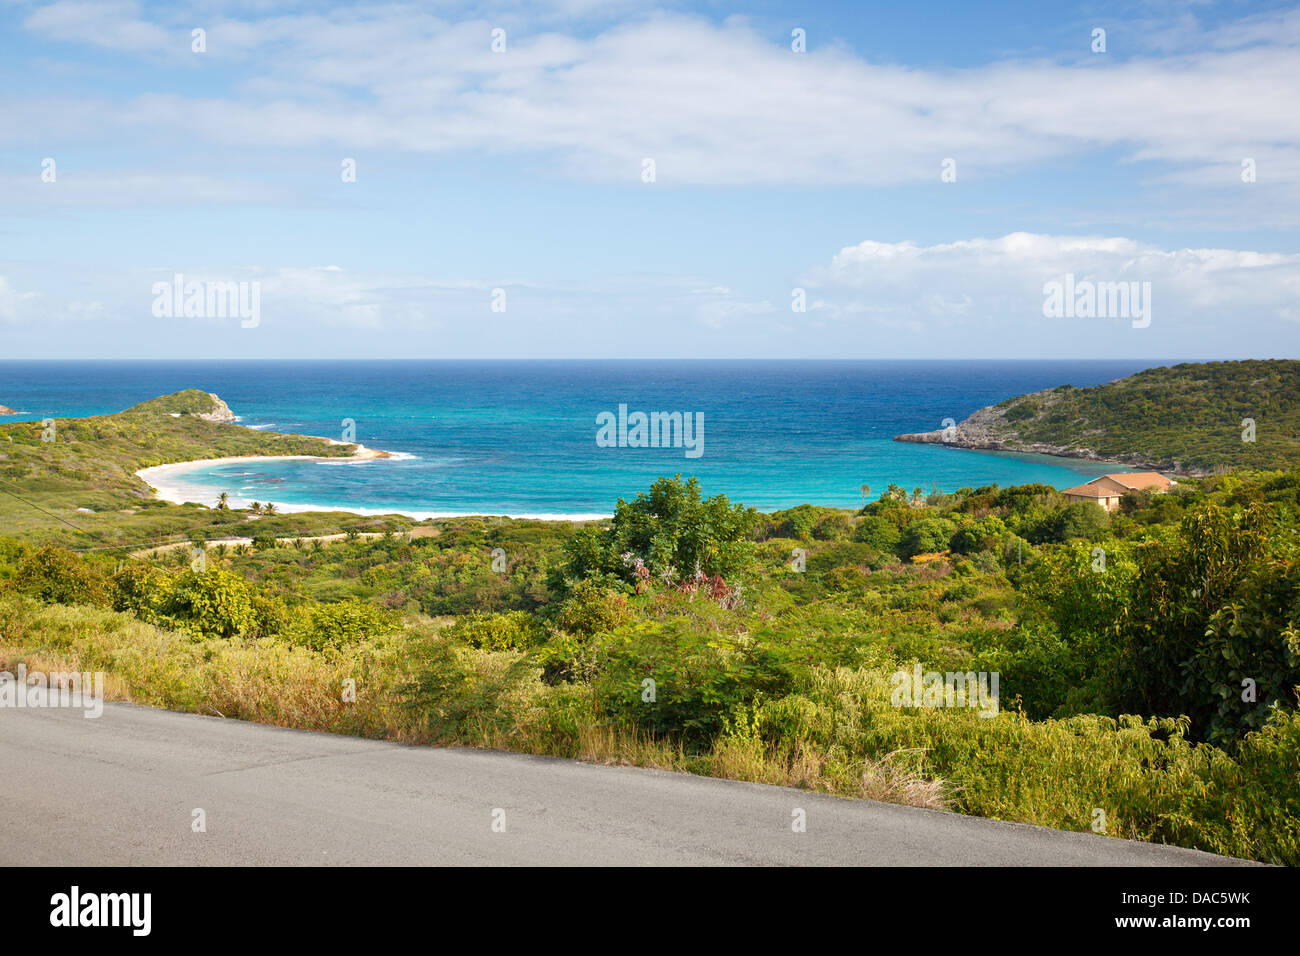 Perfect caribbean bay with palm trees and turquoise sea. Half Moon Bay, Antigua. Stock Photo